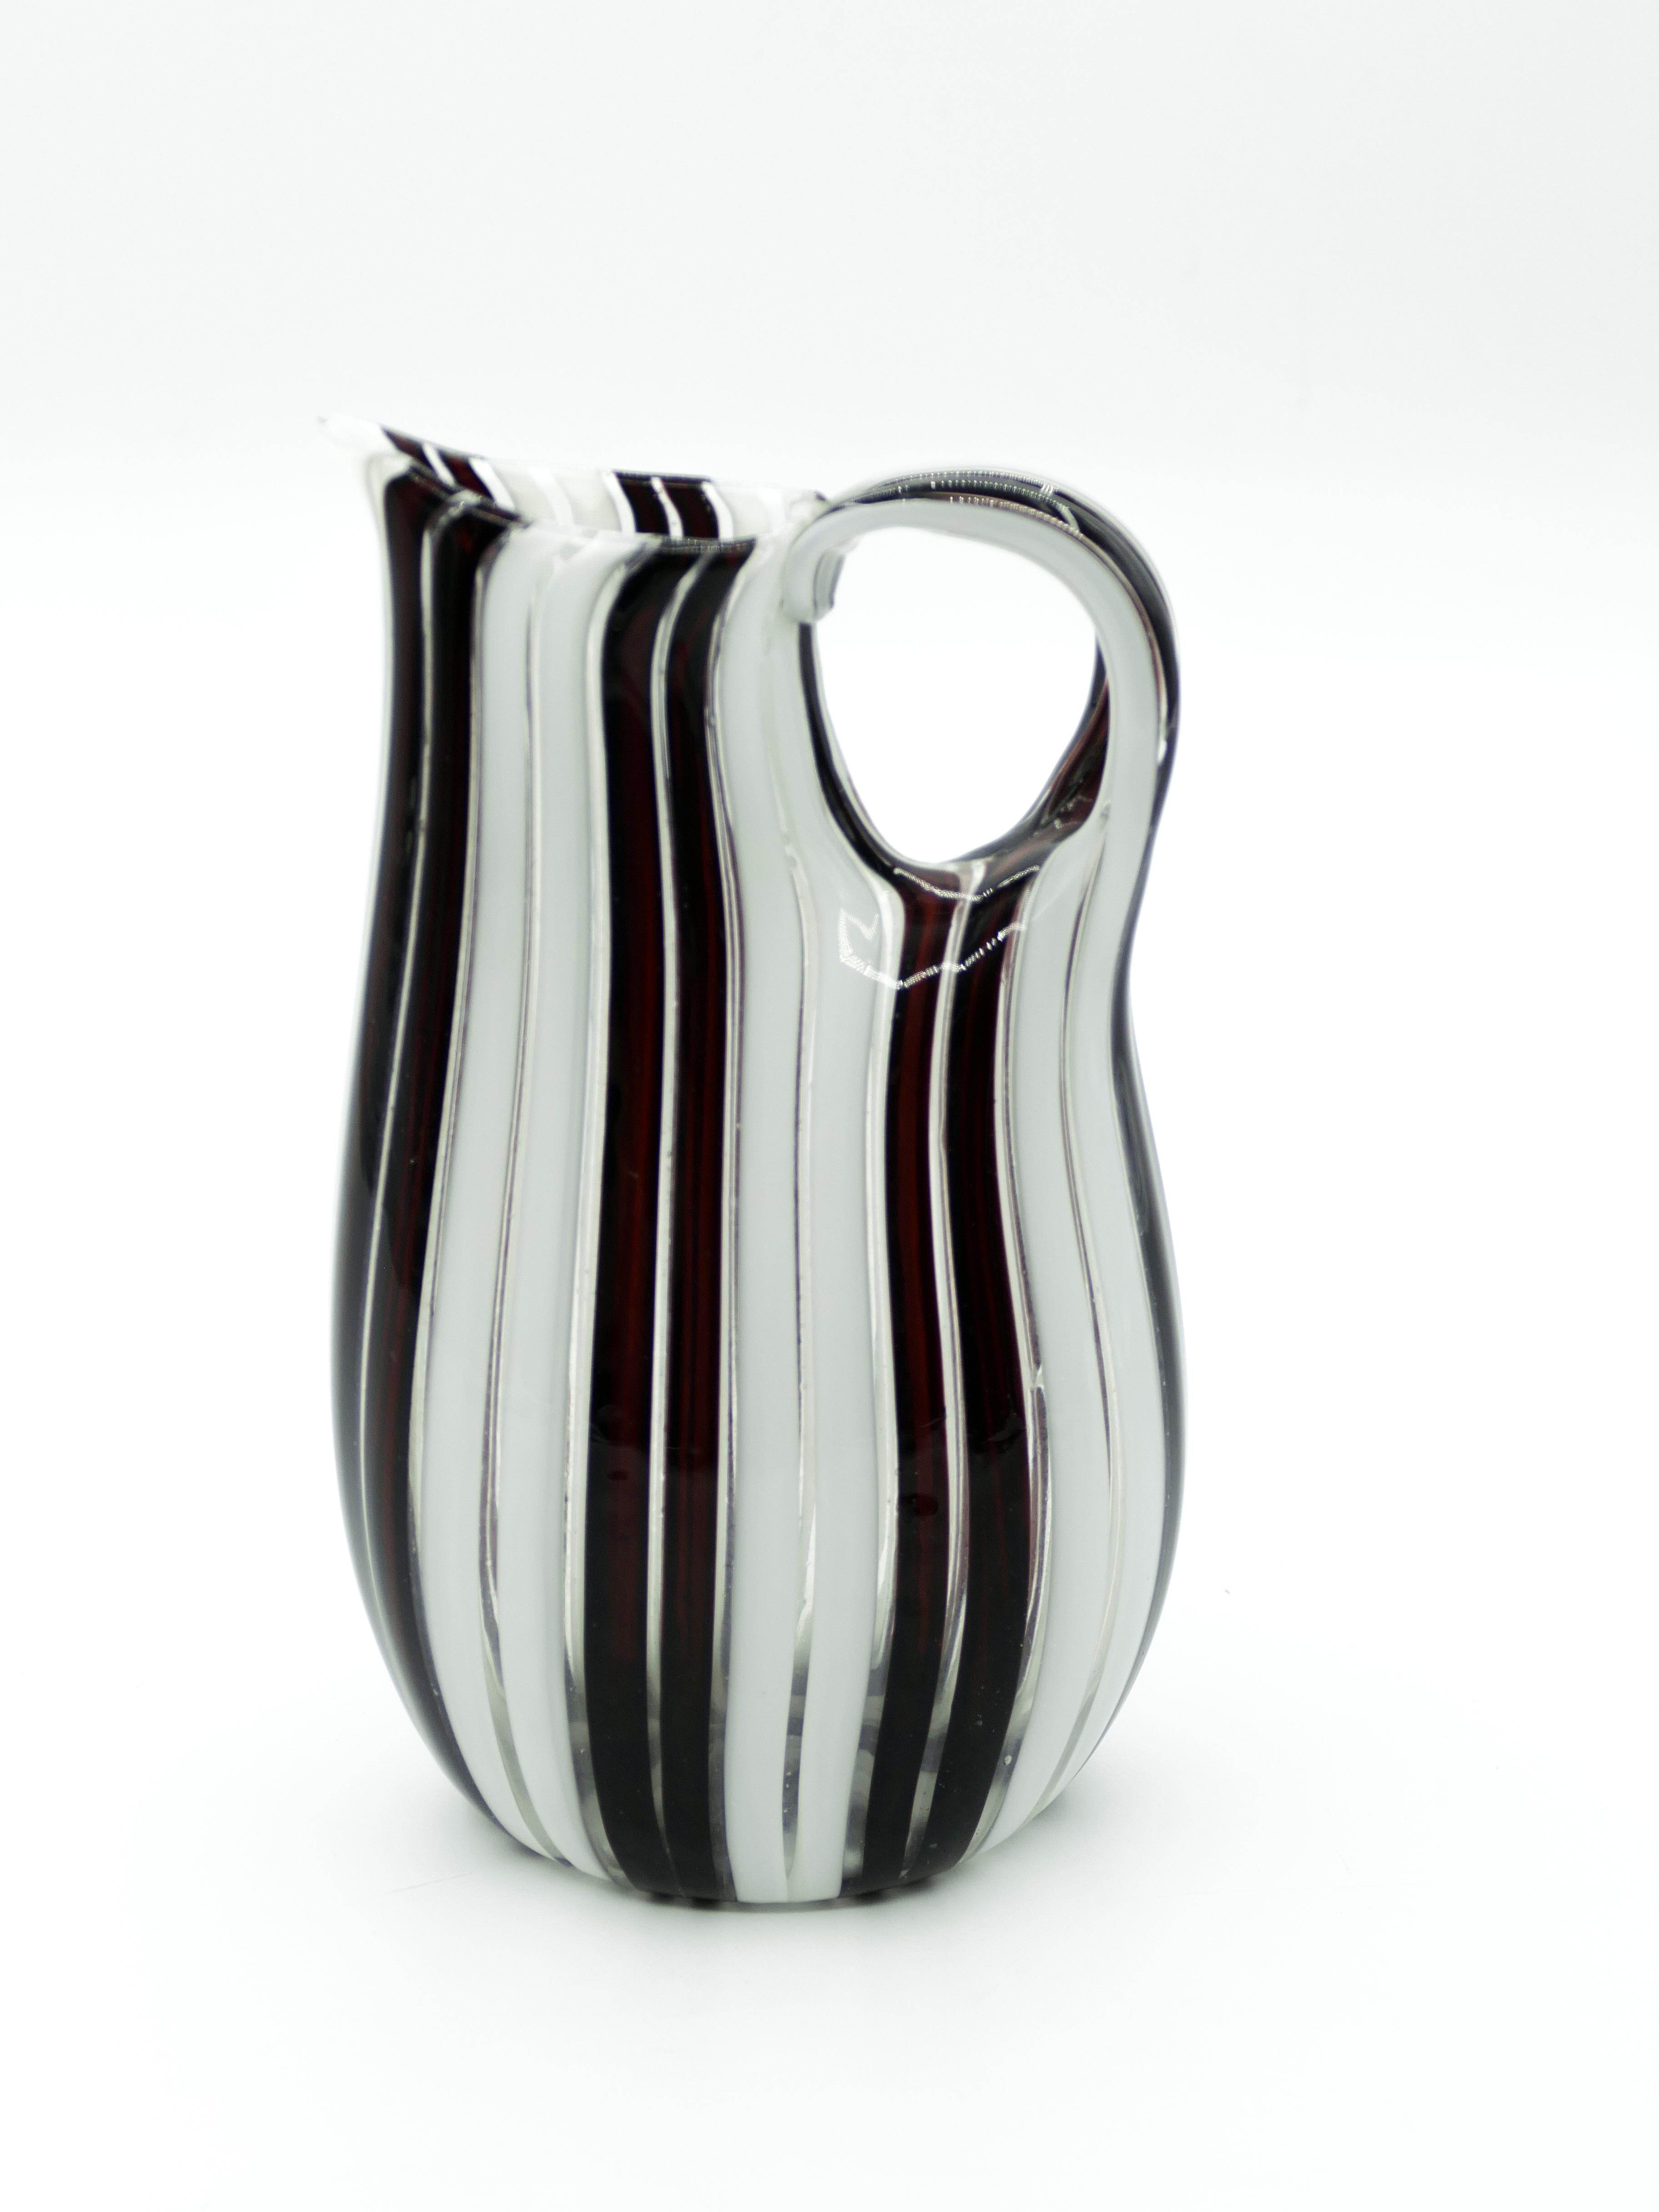 Murano striped vase is a beautiful glass decorative object with a handle, realized in the second

Half of the 20th century and of Italian manufacture. 

This valuable Murano glass object, carafe-shaped, oval stand, flat body, has the peculiarity